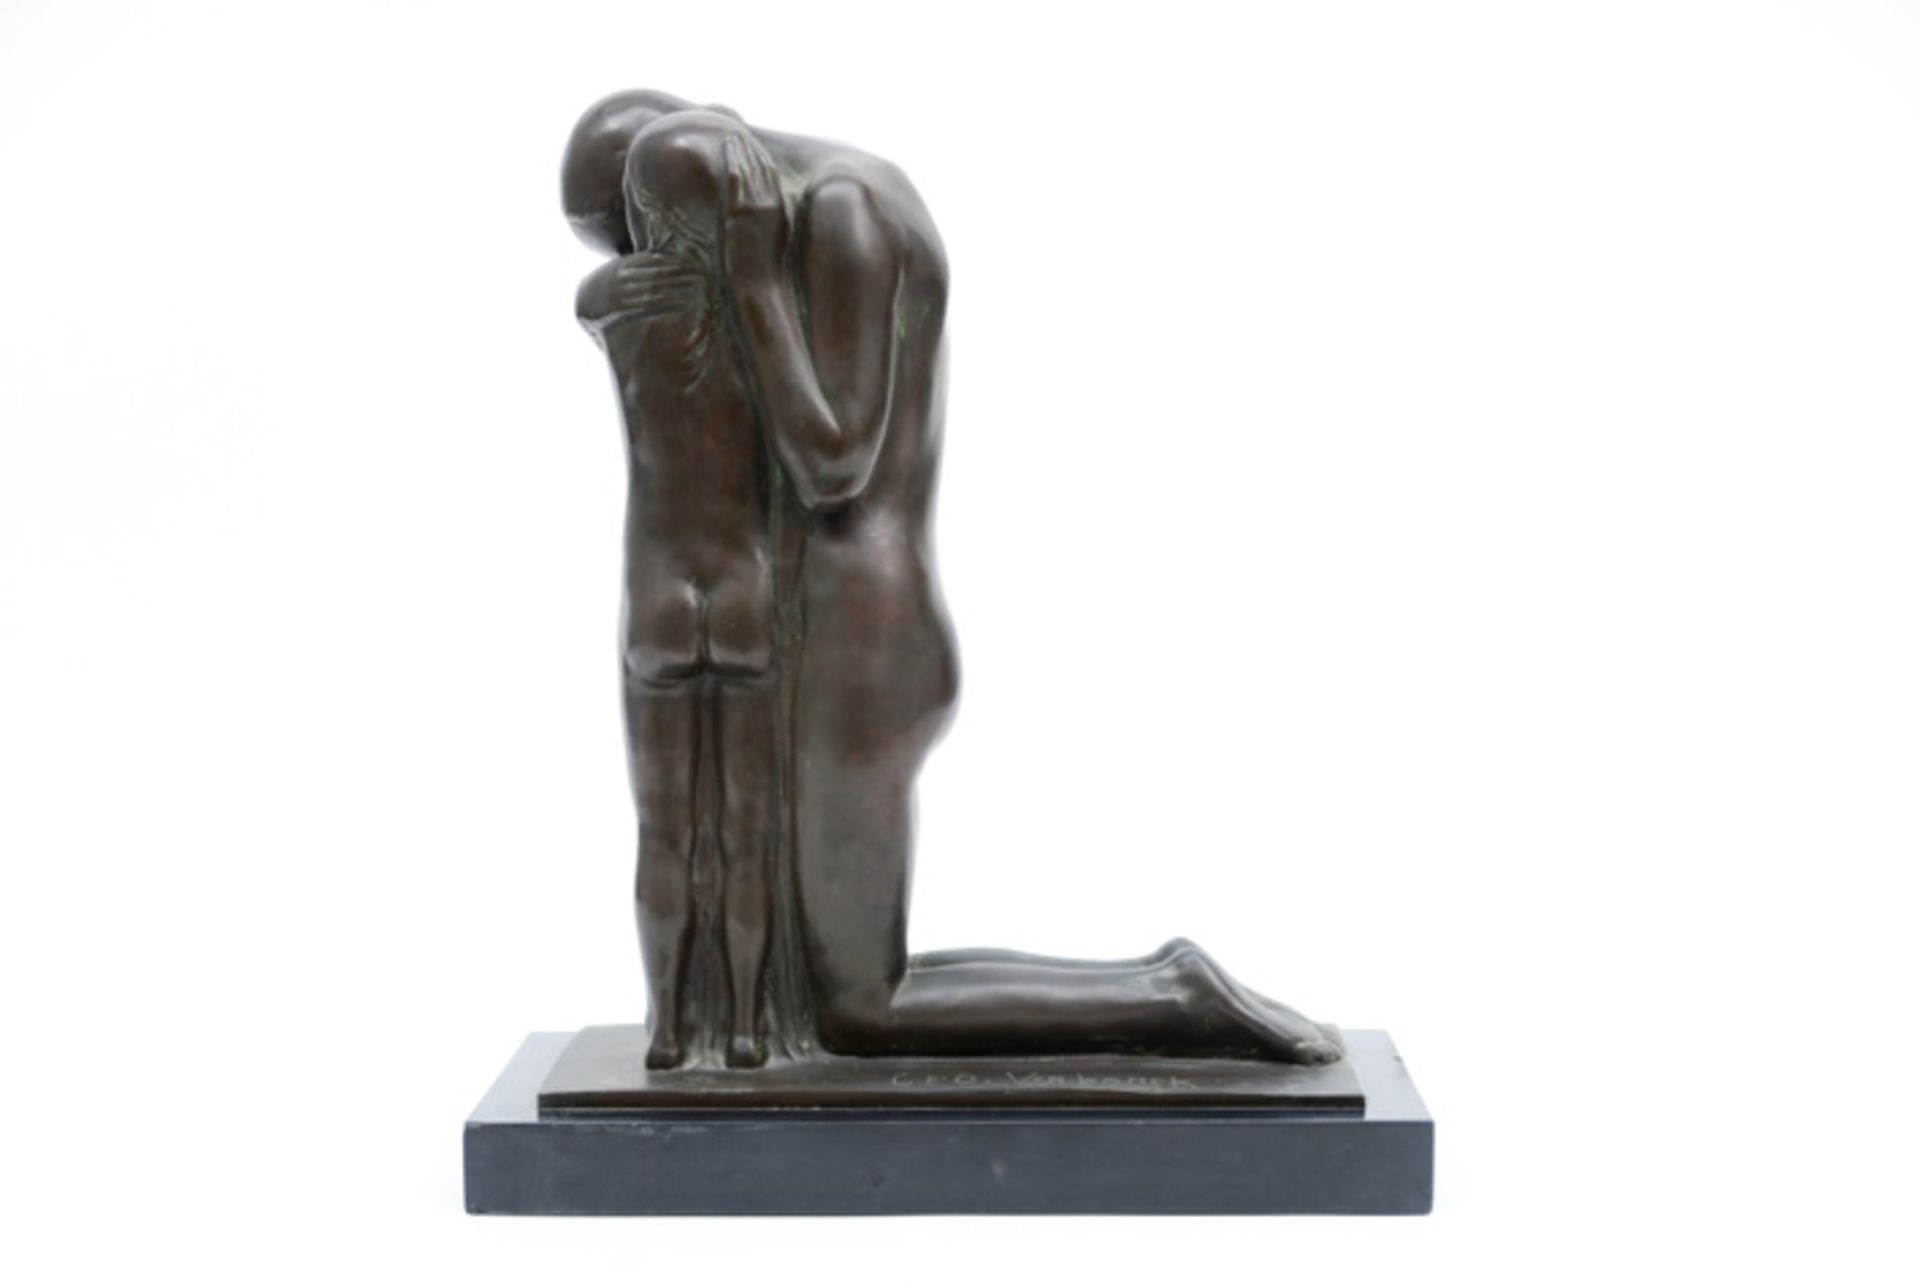 20th Cent. Belgian typical Geo Verbanck "father and child" sculpture in bronze - signed and with